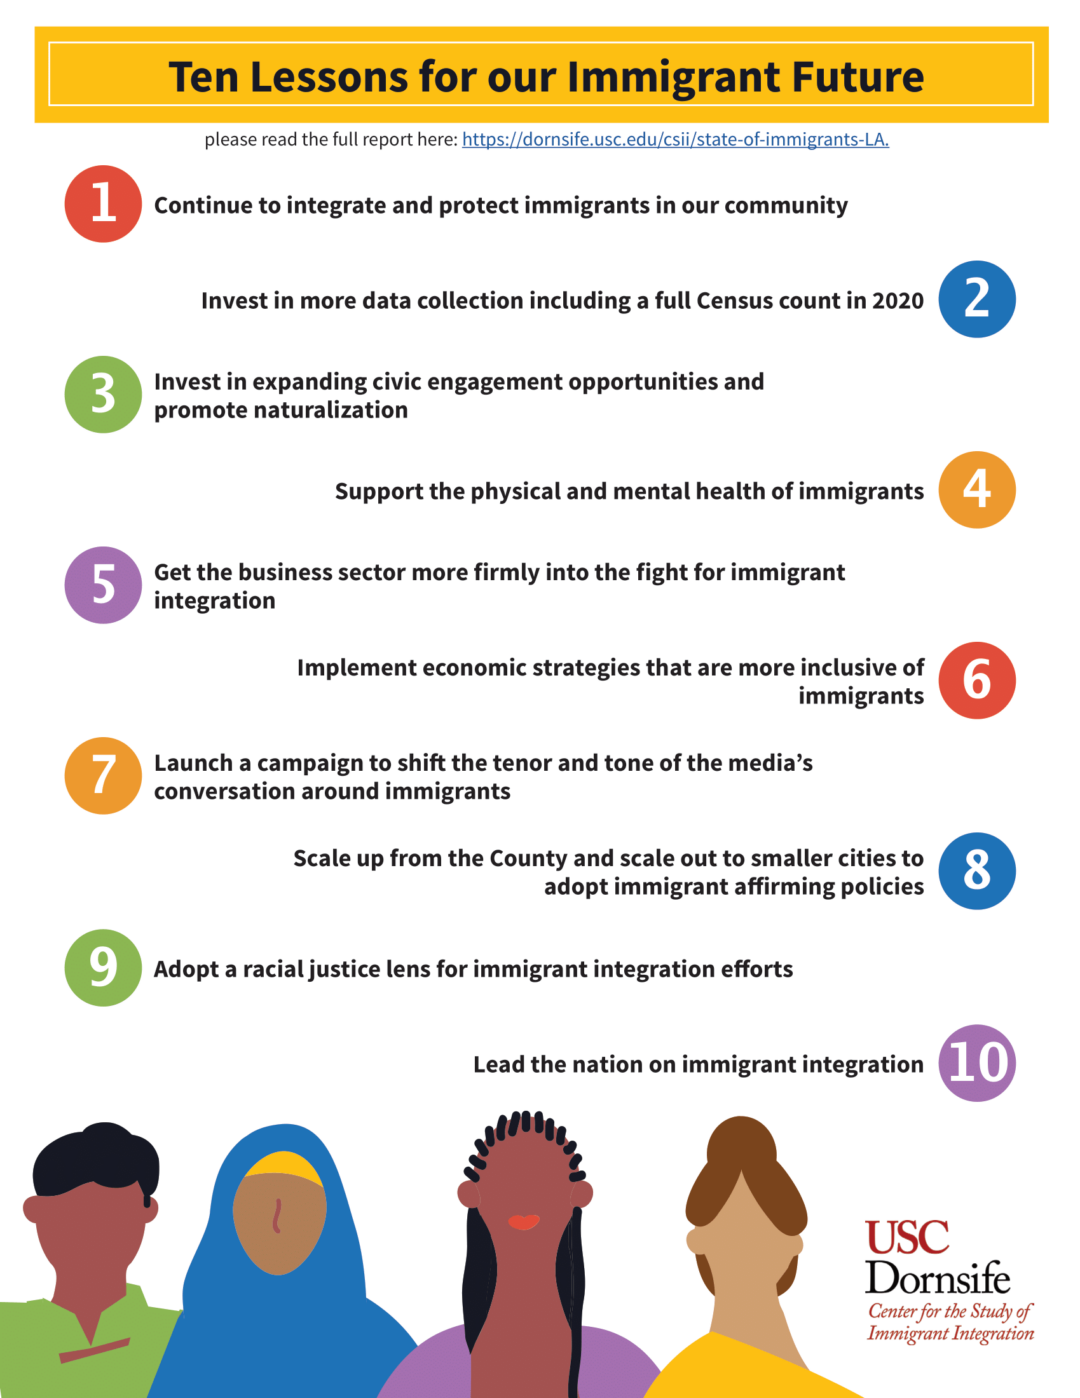 Infographic on the 10 lessons for our Immigrant Future, with a graphical artwork depicting diverse people at the bottom left-hand side